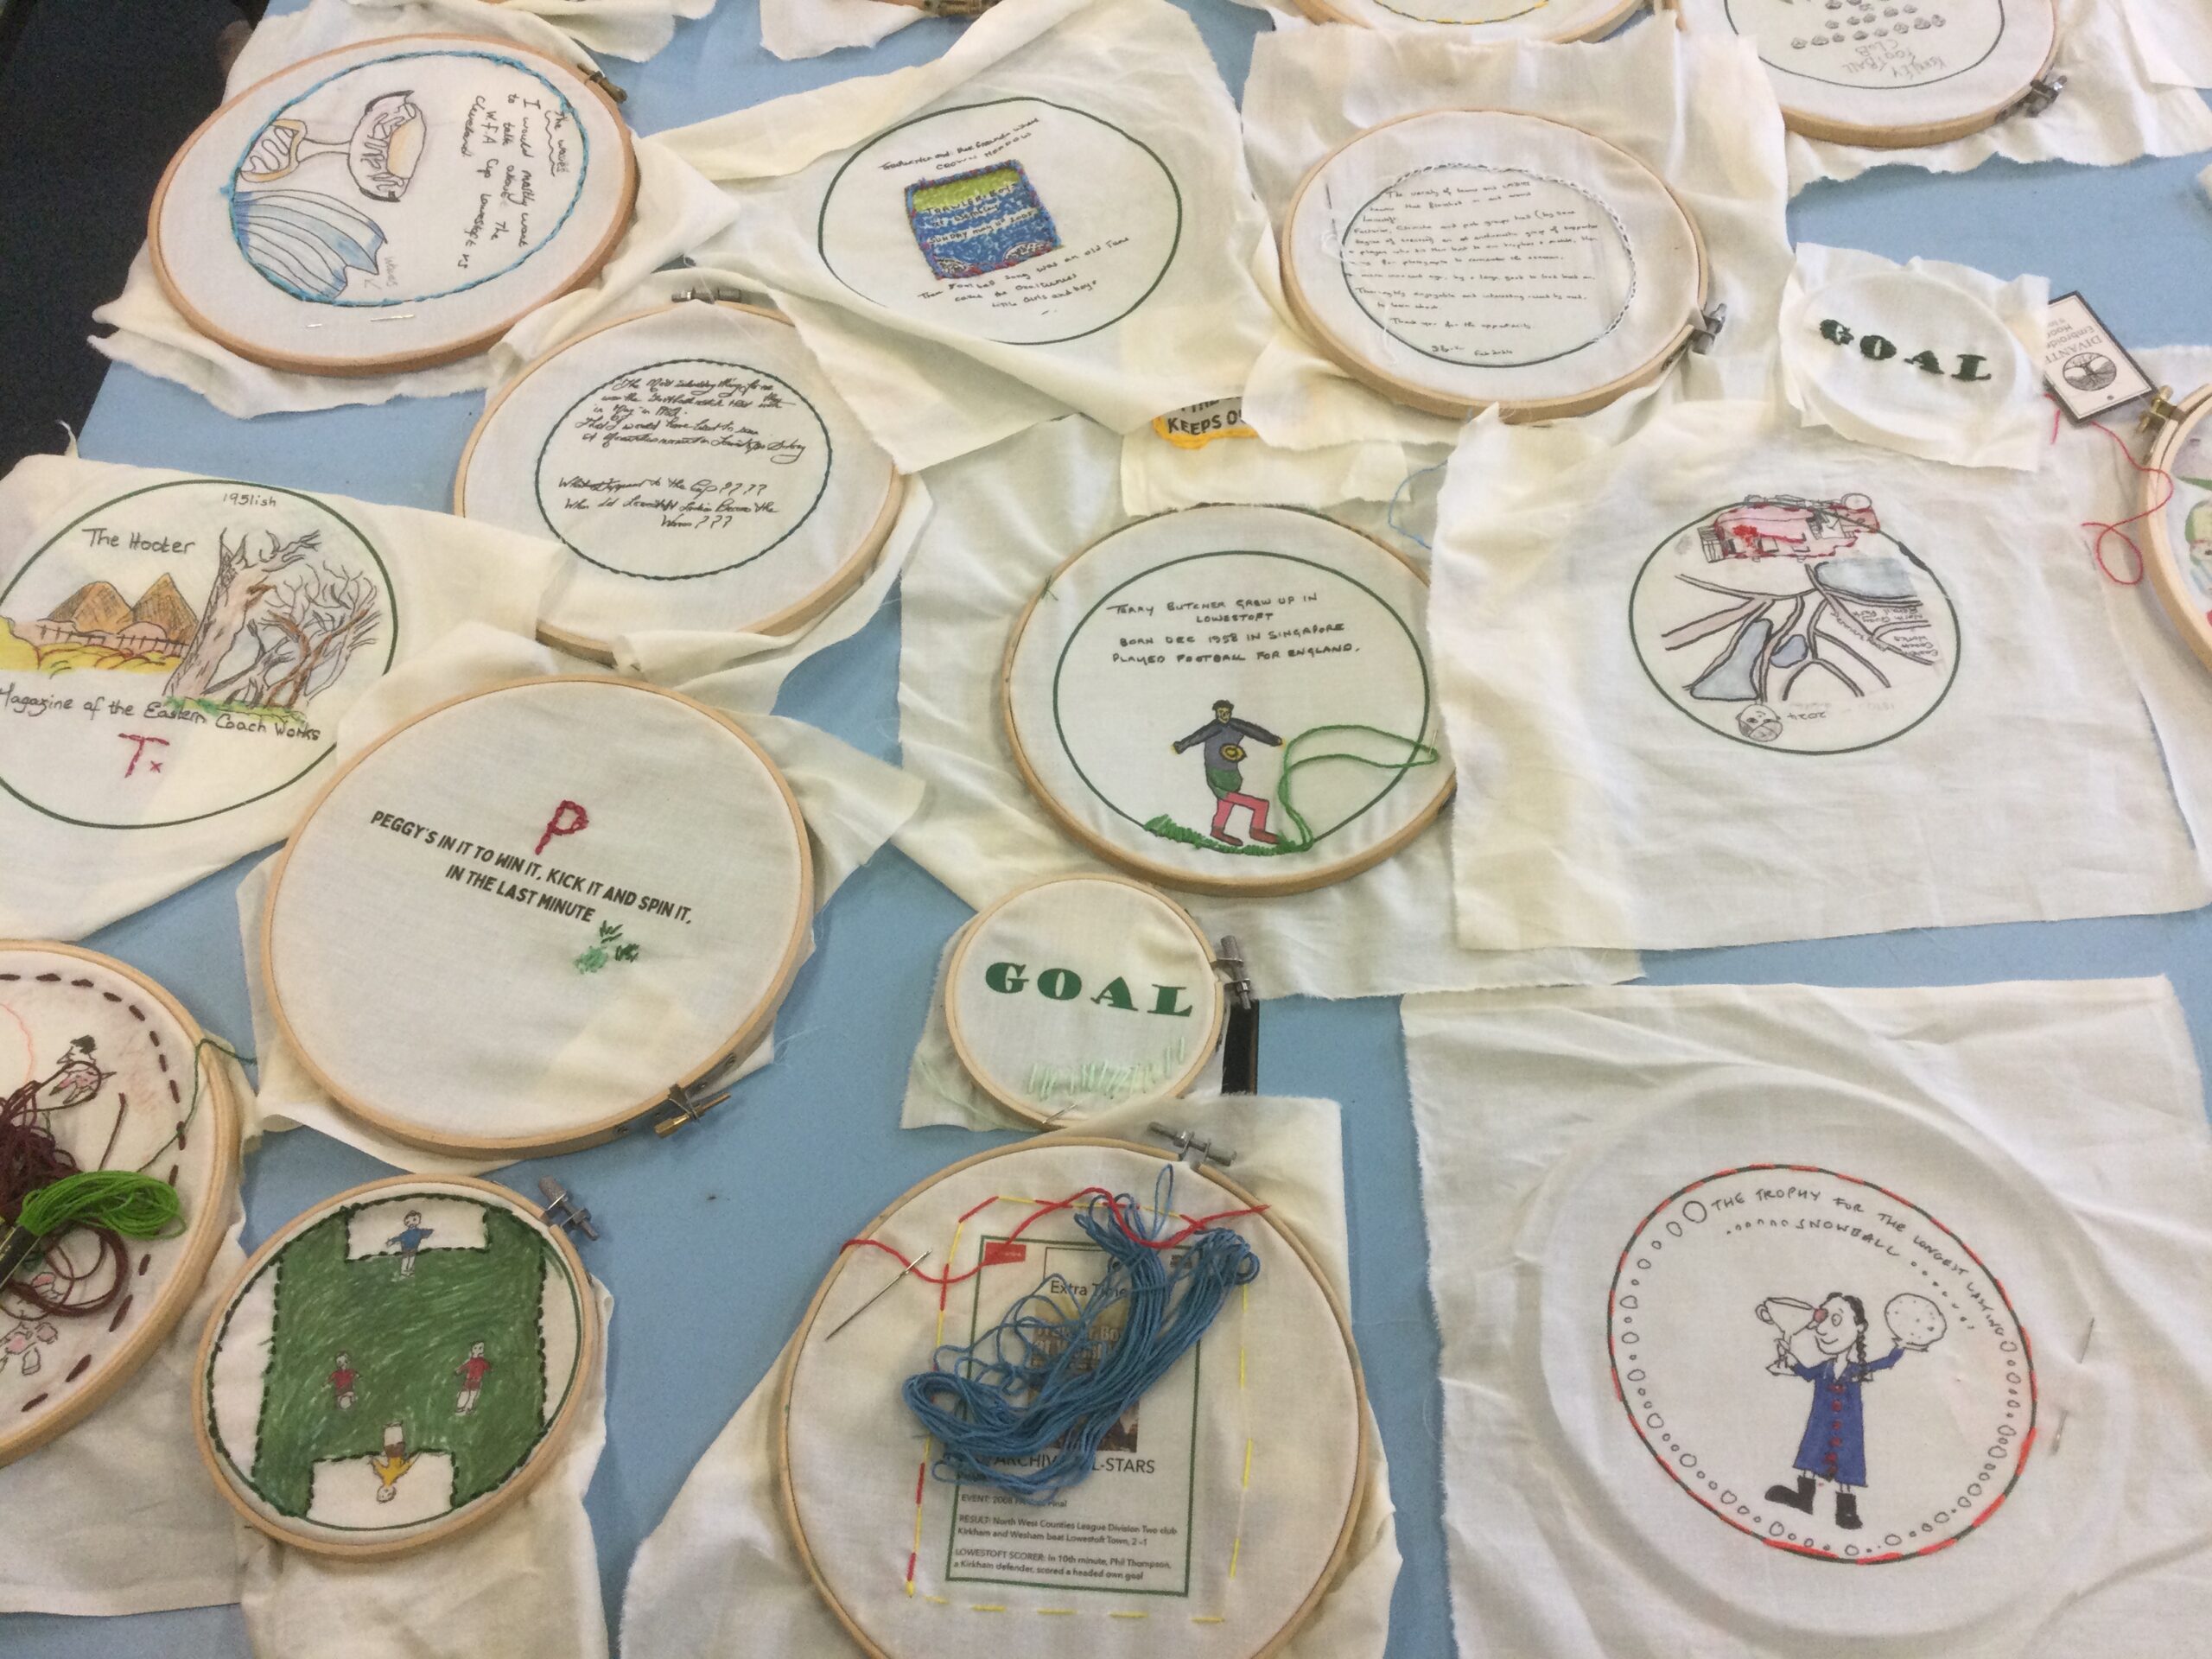 A number of pieces of printed fabric, held in wooden embroidery hoops, some of them already stitched